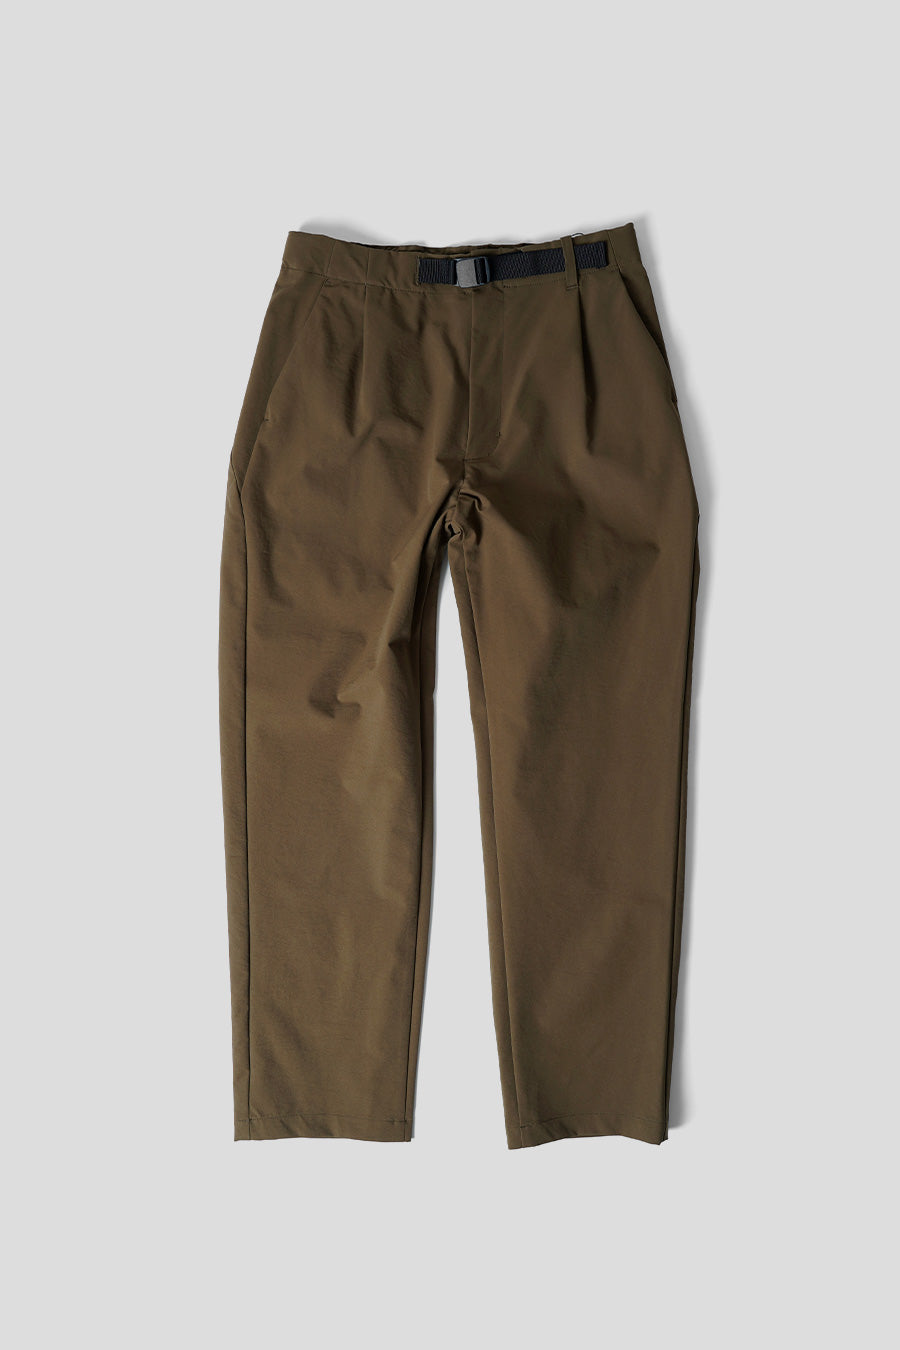 Goldwin One Tuck Tapered Stretch Pants - Clay Beige – The 5th Store